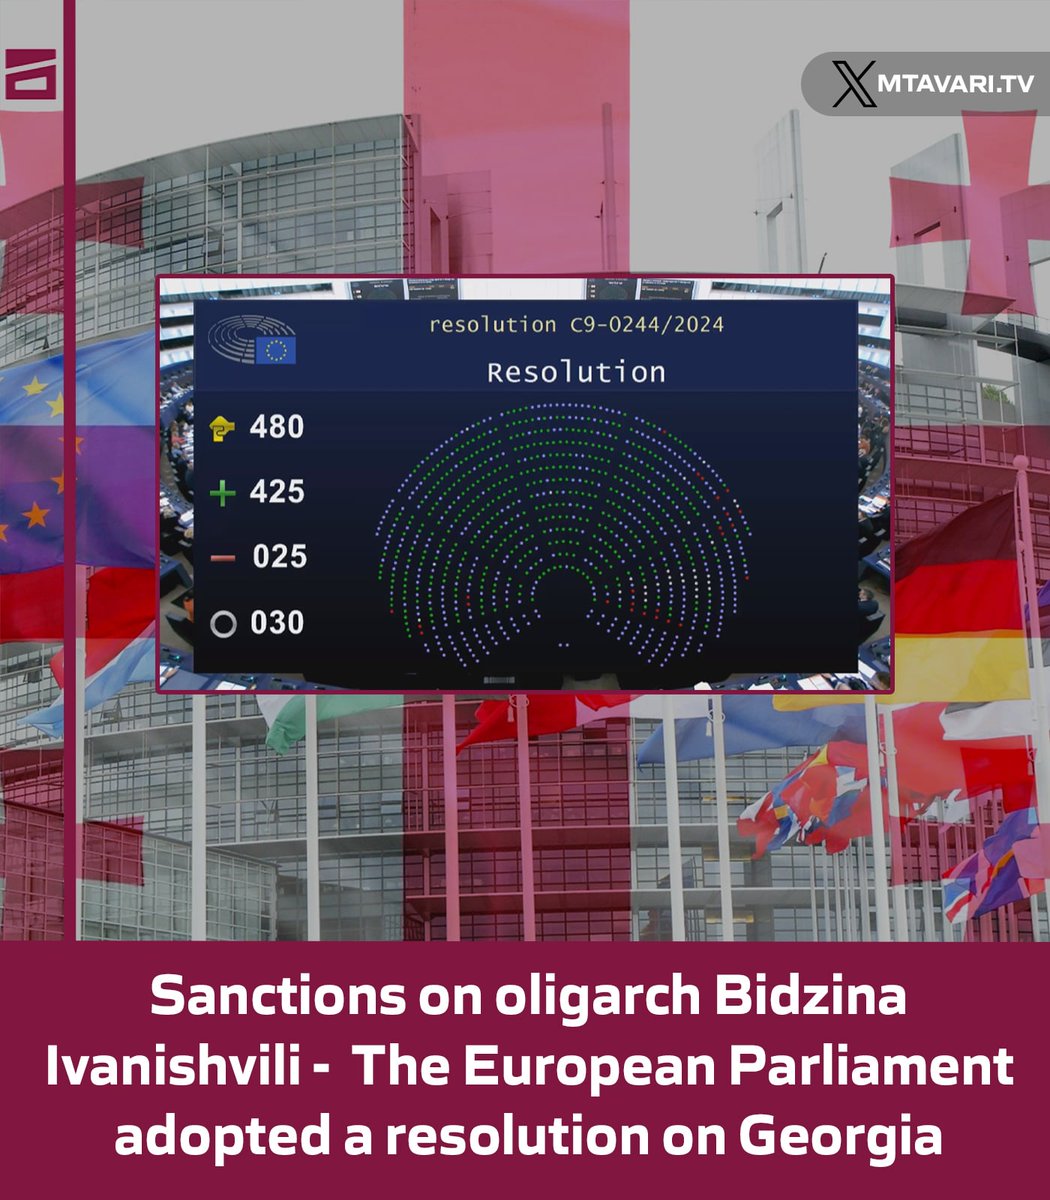 Sanctions on oligarch Bidzina Ivanishvili, revision of visa-free regime criteria and, in case of adoption of the Russian law, refusal to move to the EU accession negotiations stage - The European Parliament adopted a resolution on #Georgia